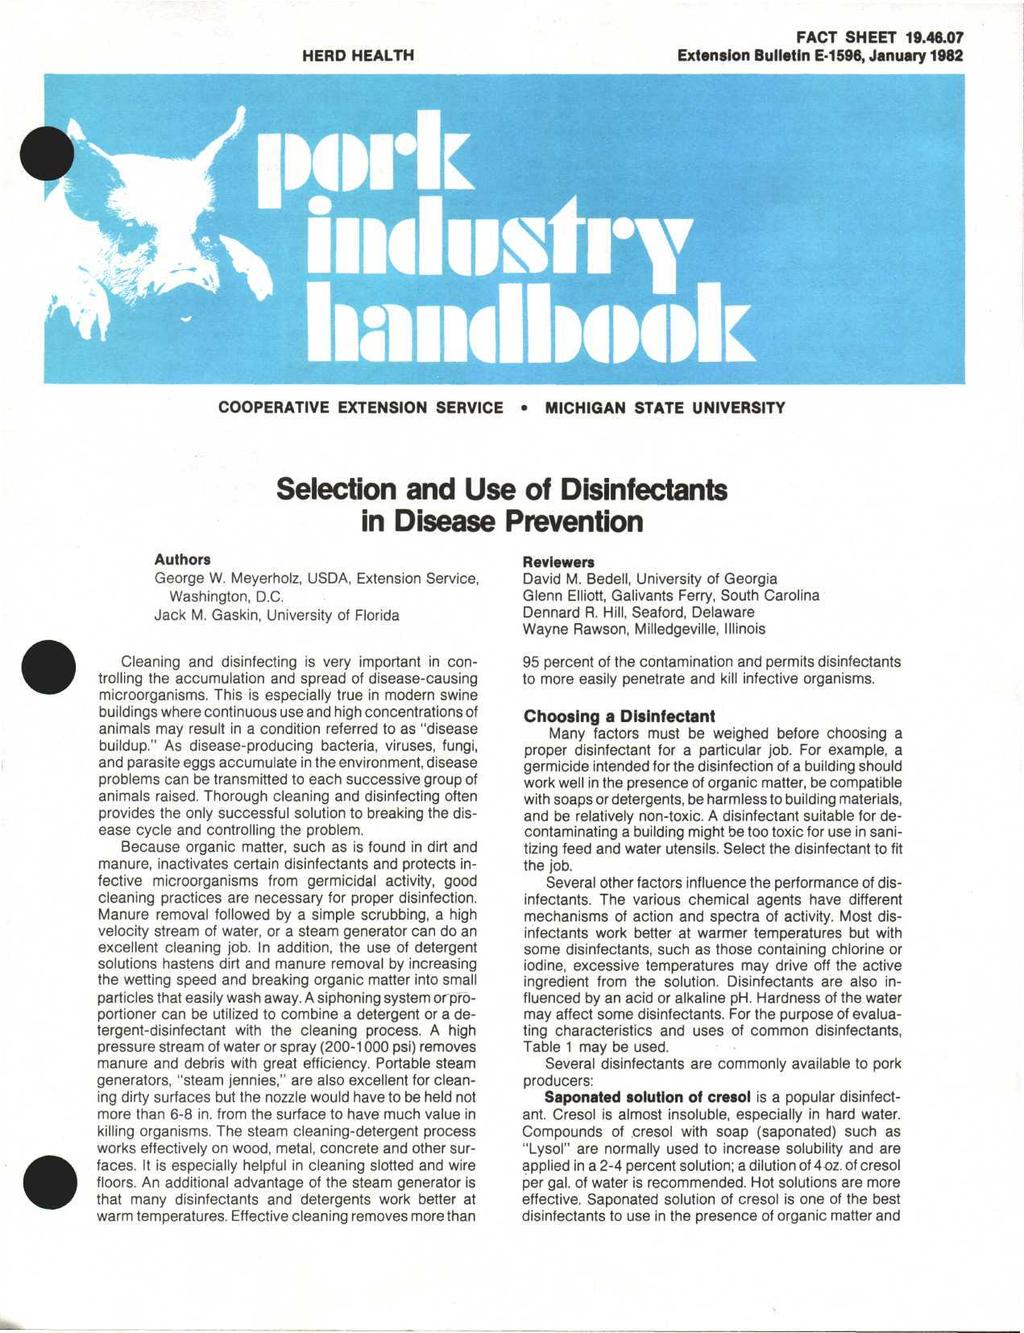 HERD HEALTH FACT SHEET 19.46.07 Extension Bulletin E-1596, January 1982 COOPERATIVE EXTENSION SERVI MICHIGAN STATE UNIVERSITY Selection and Use of Disinfectants in Disease Prevention Authors George W.